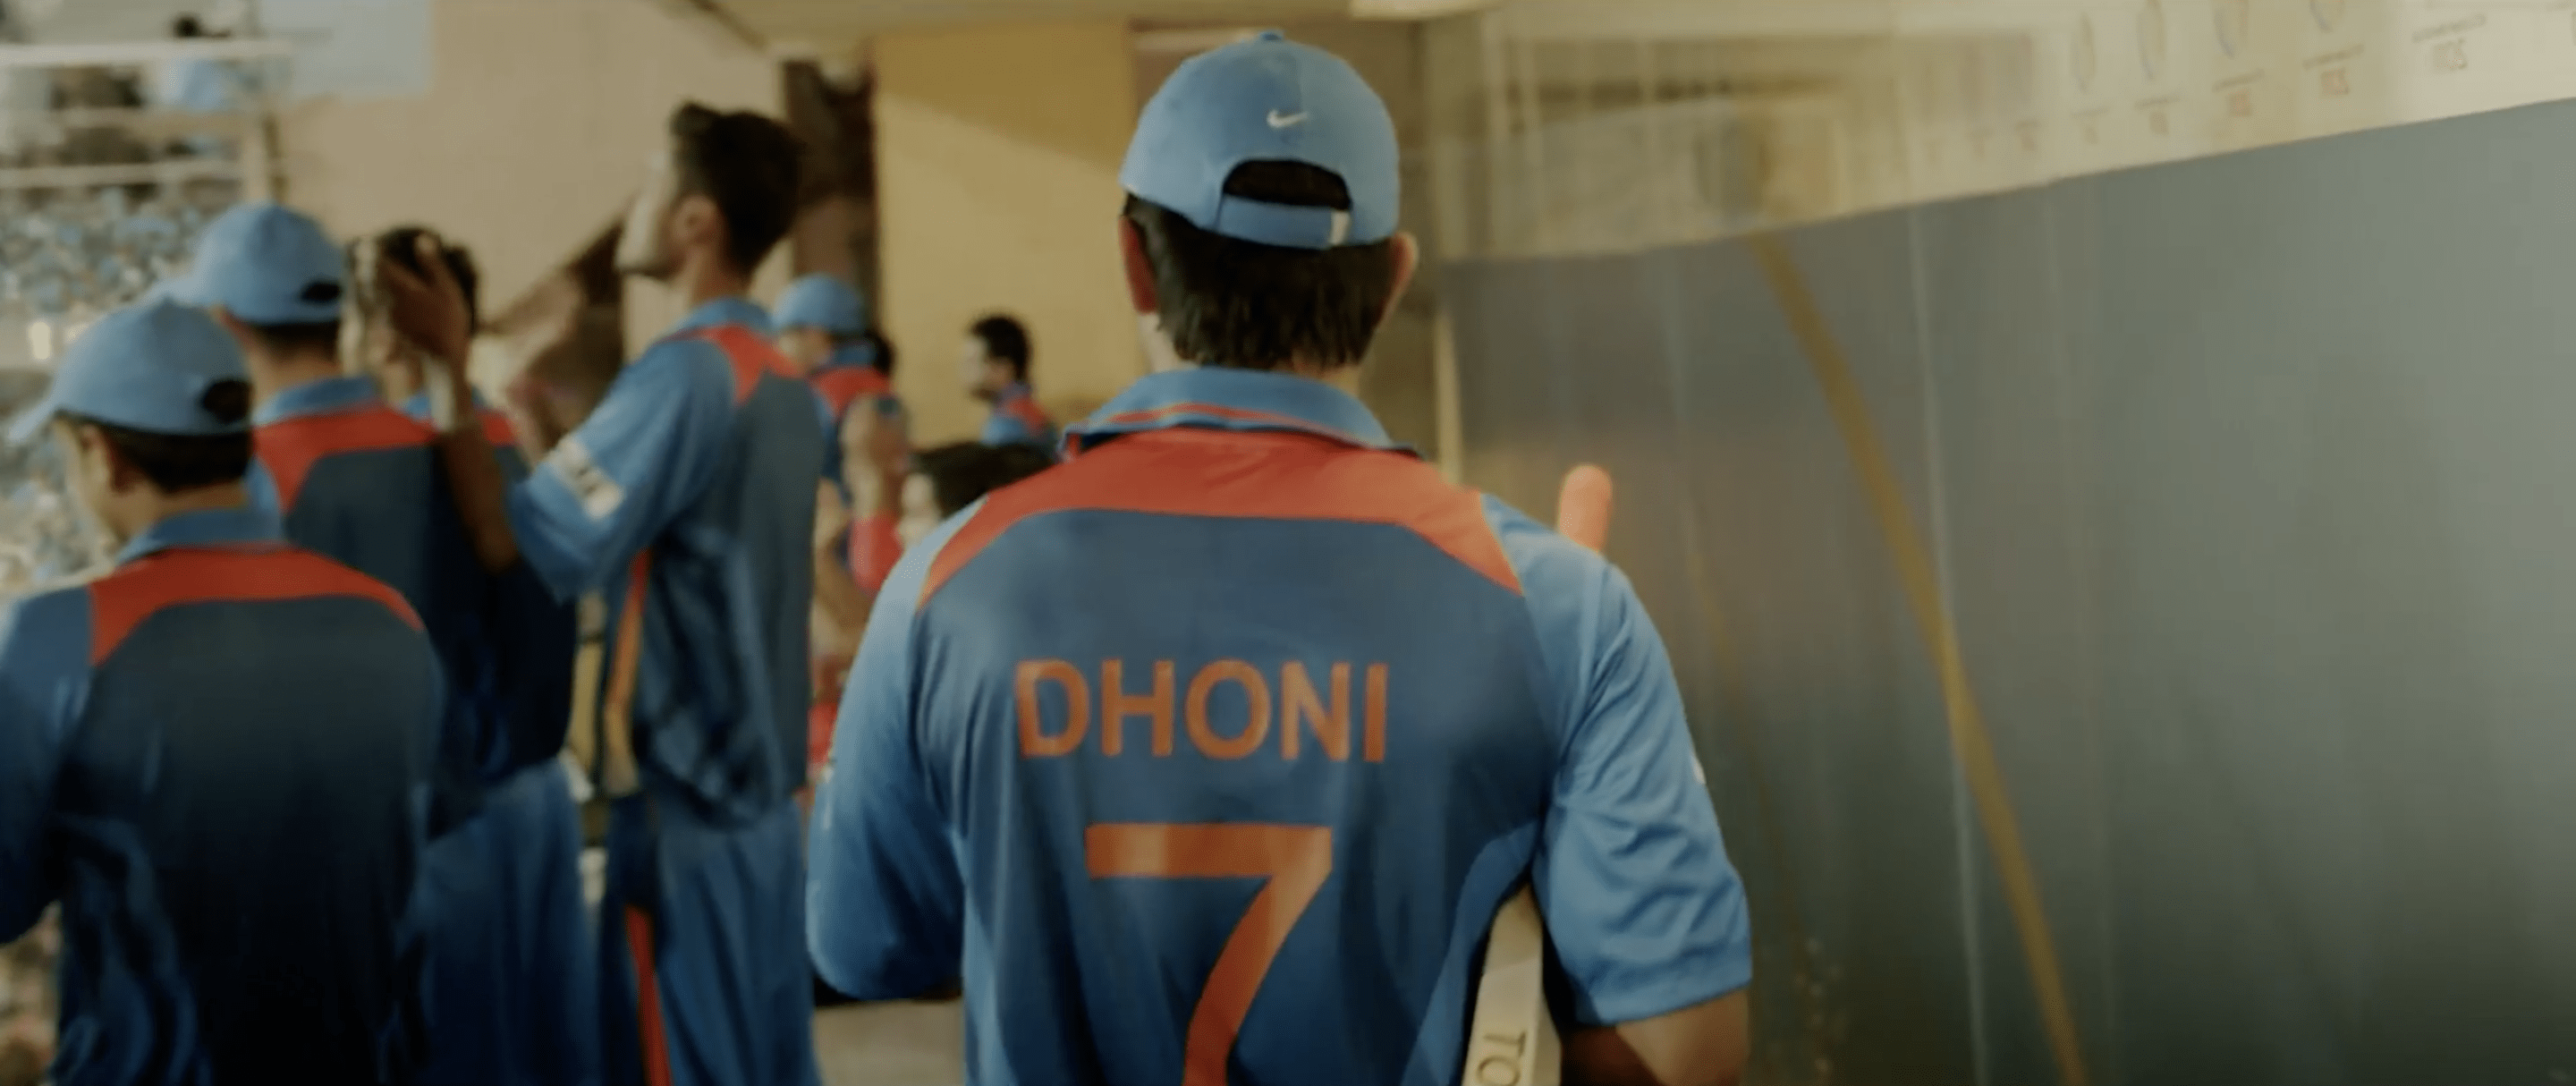 M.S. Dhoni The Untold Story (2016) Review